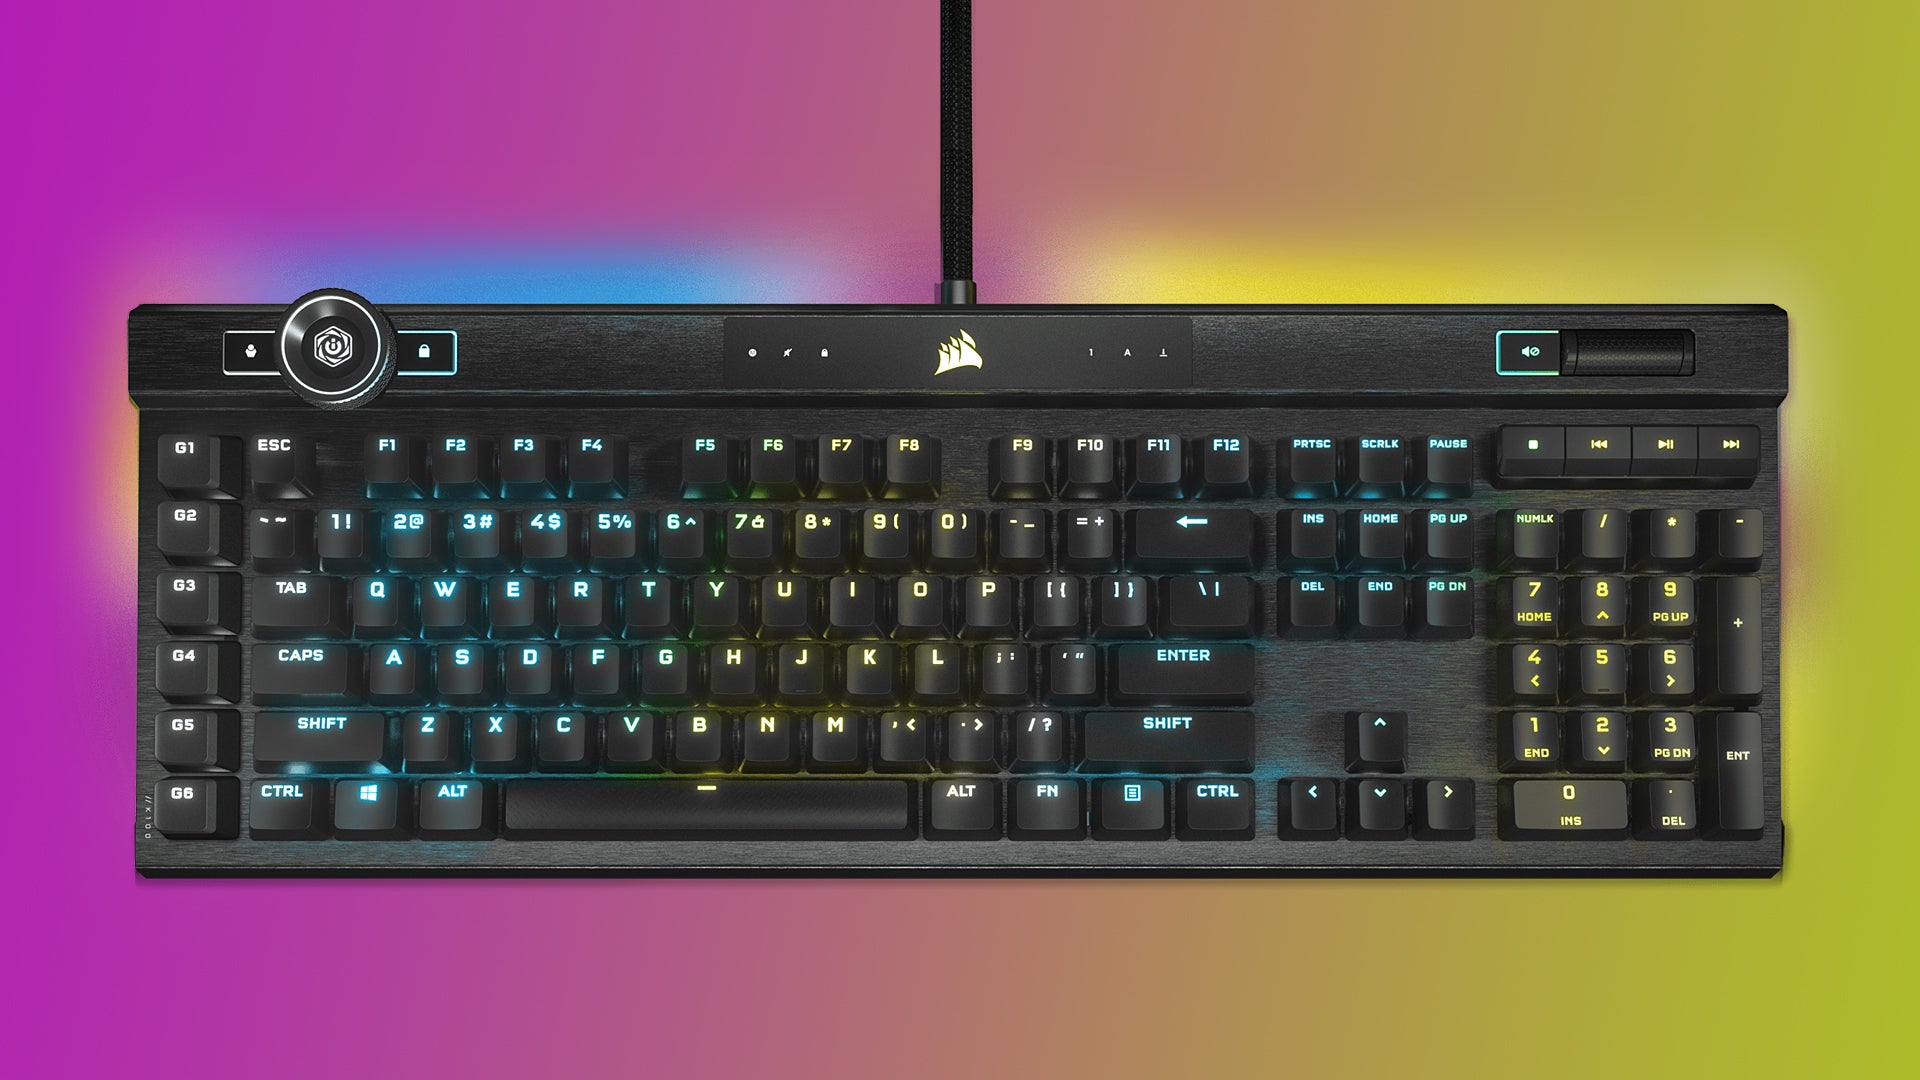 Image of a Corsair K100 keyboard on a purple to yellow gradient background.